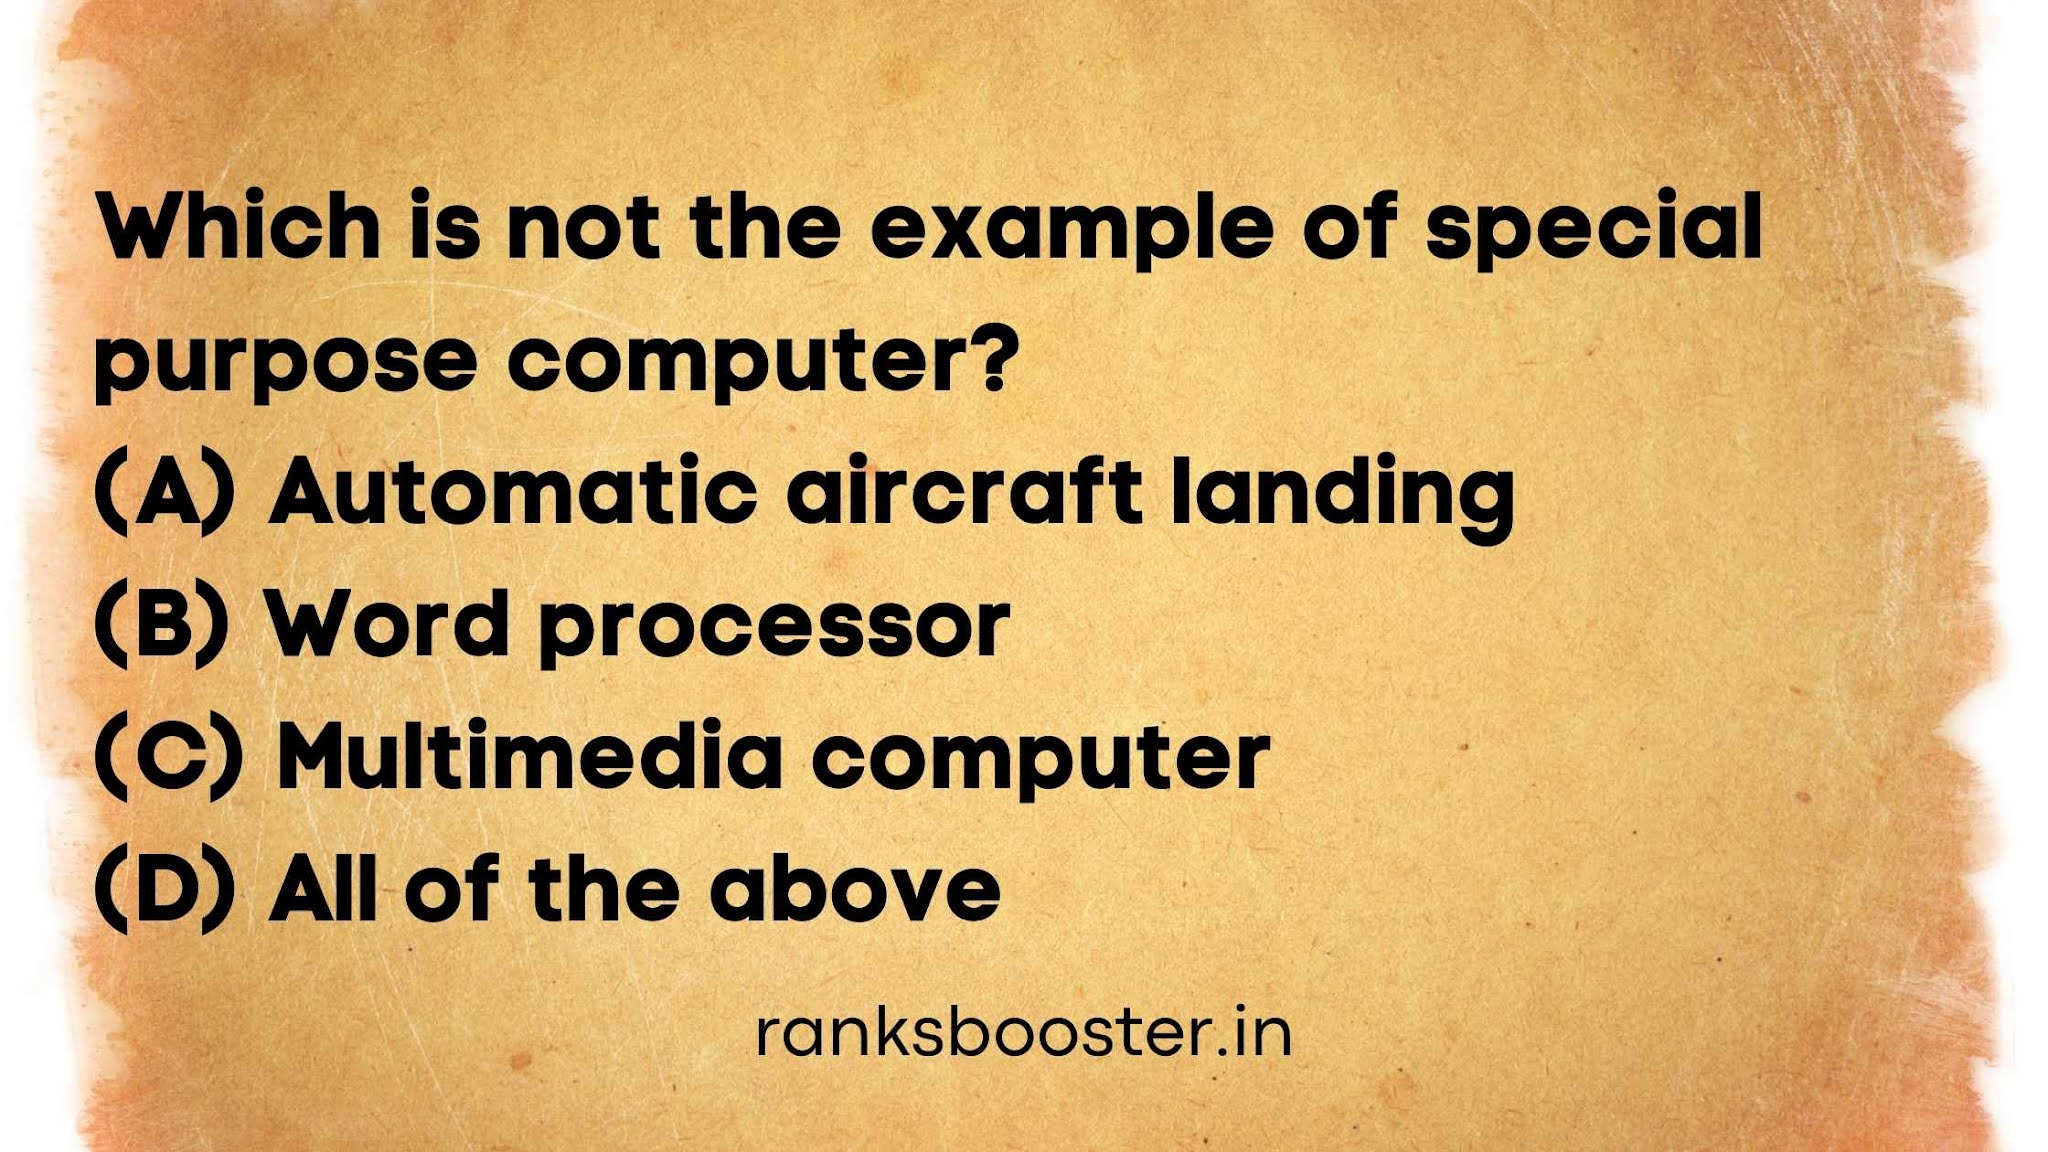 Which is not the example of special purpose computer? (A) Automatic aircraft landing (B) Word processor (C) Multimedia computer (D) All of the above